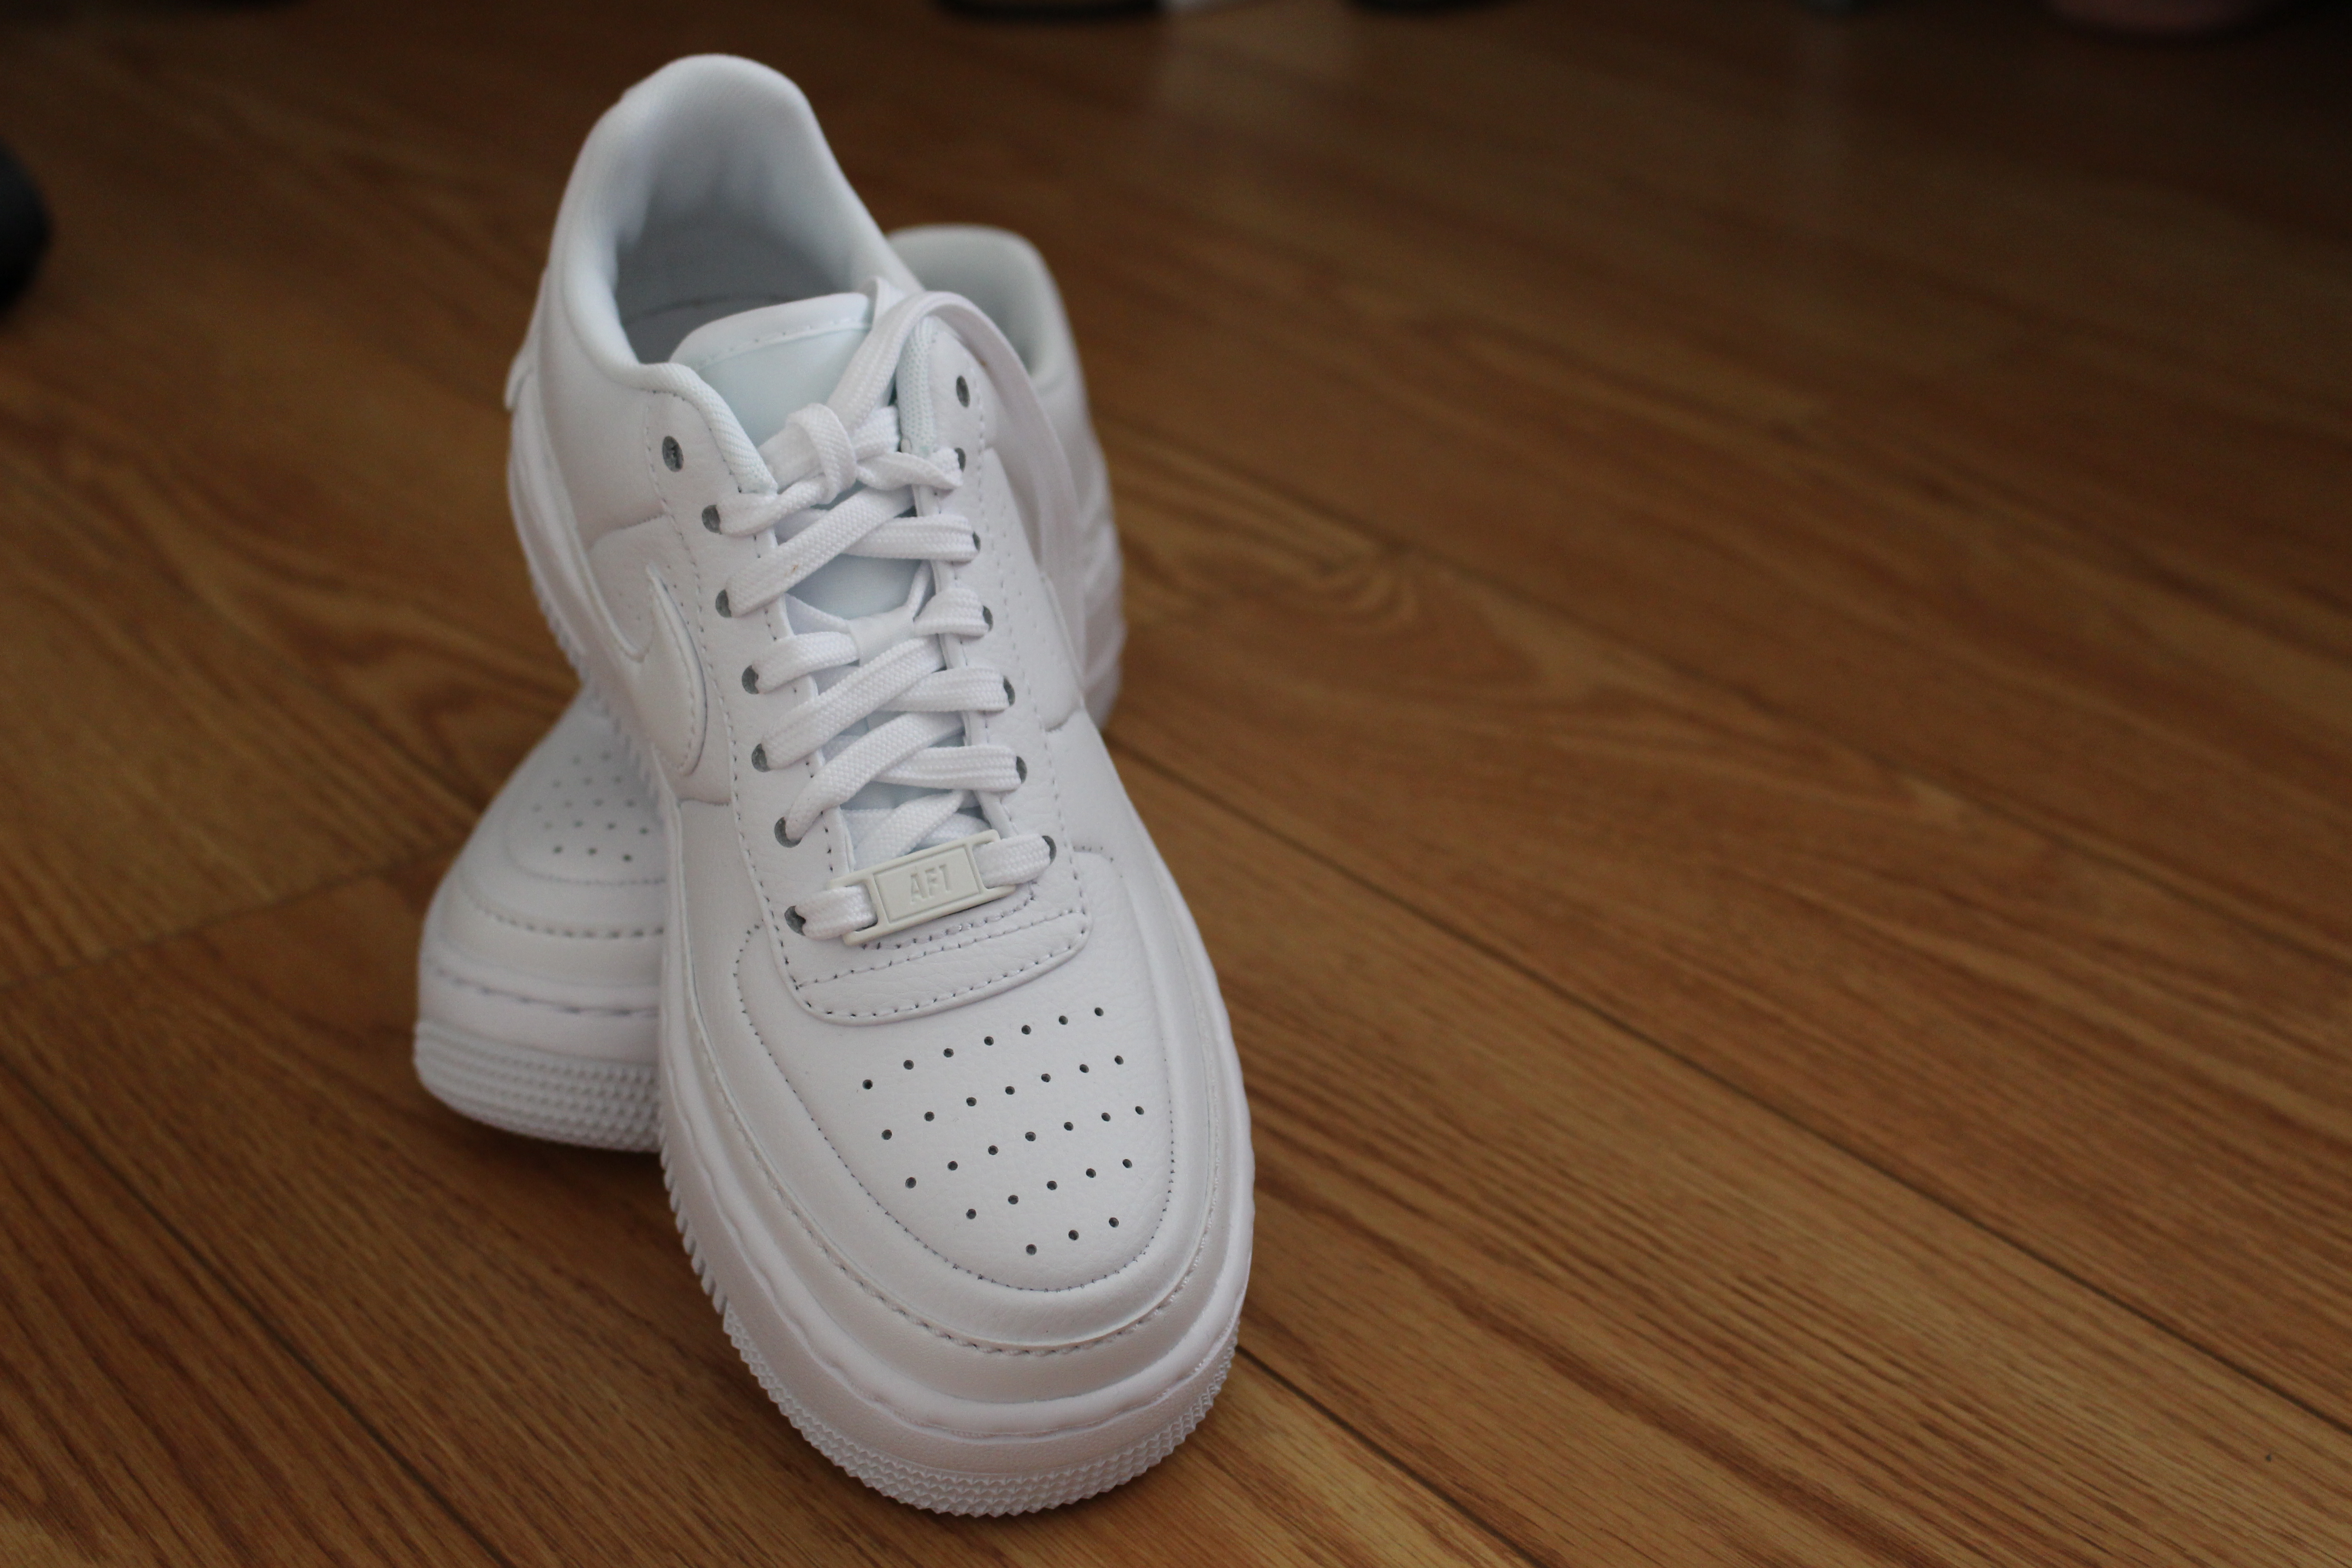 Nike Air Force 1 Jester XX Review – Pretty Petite